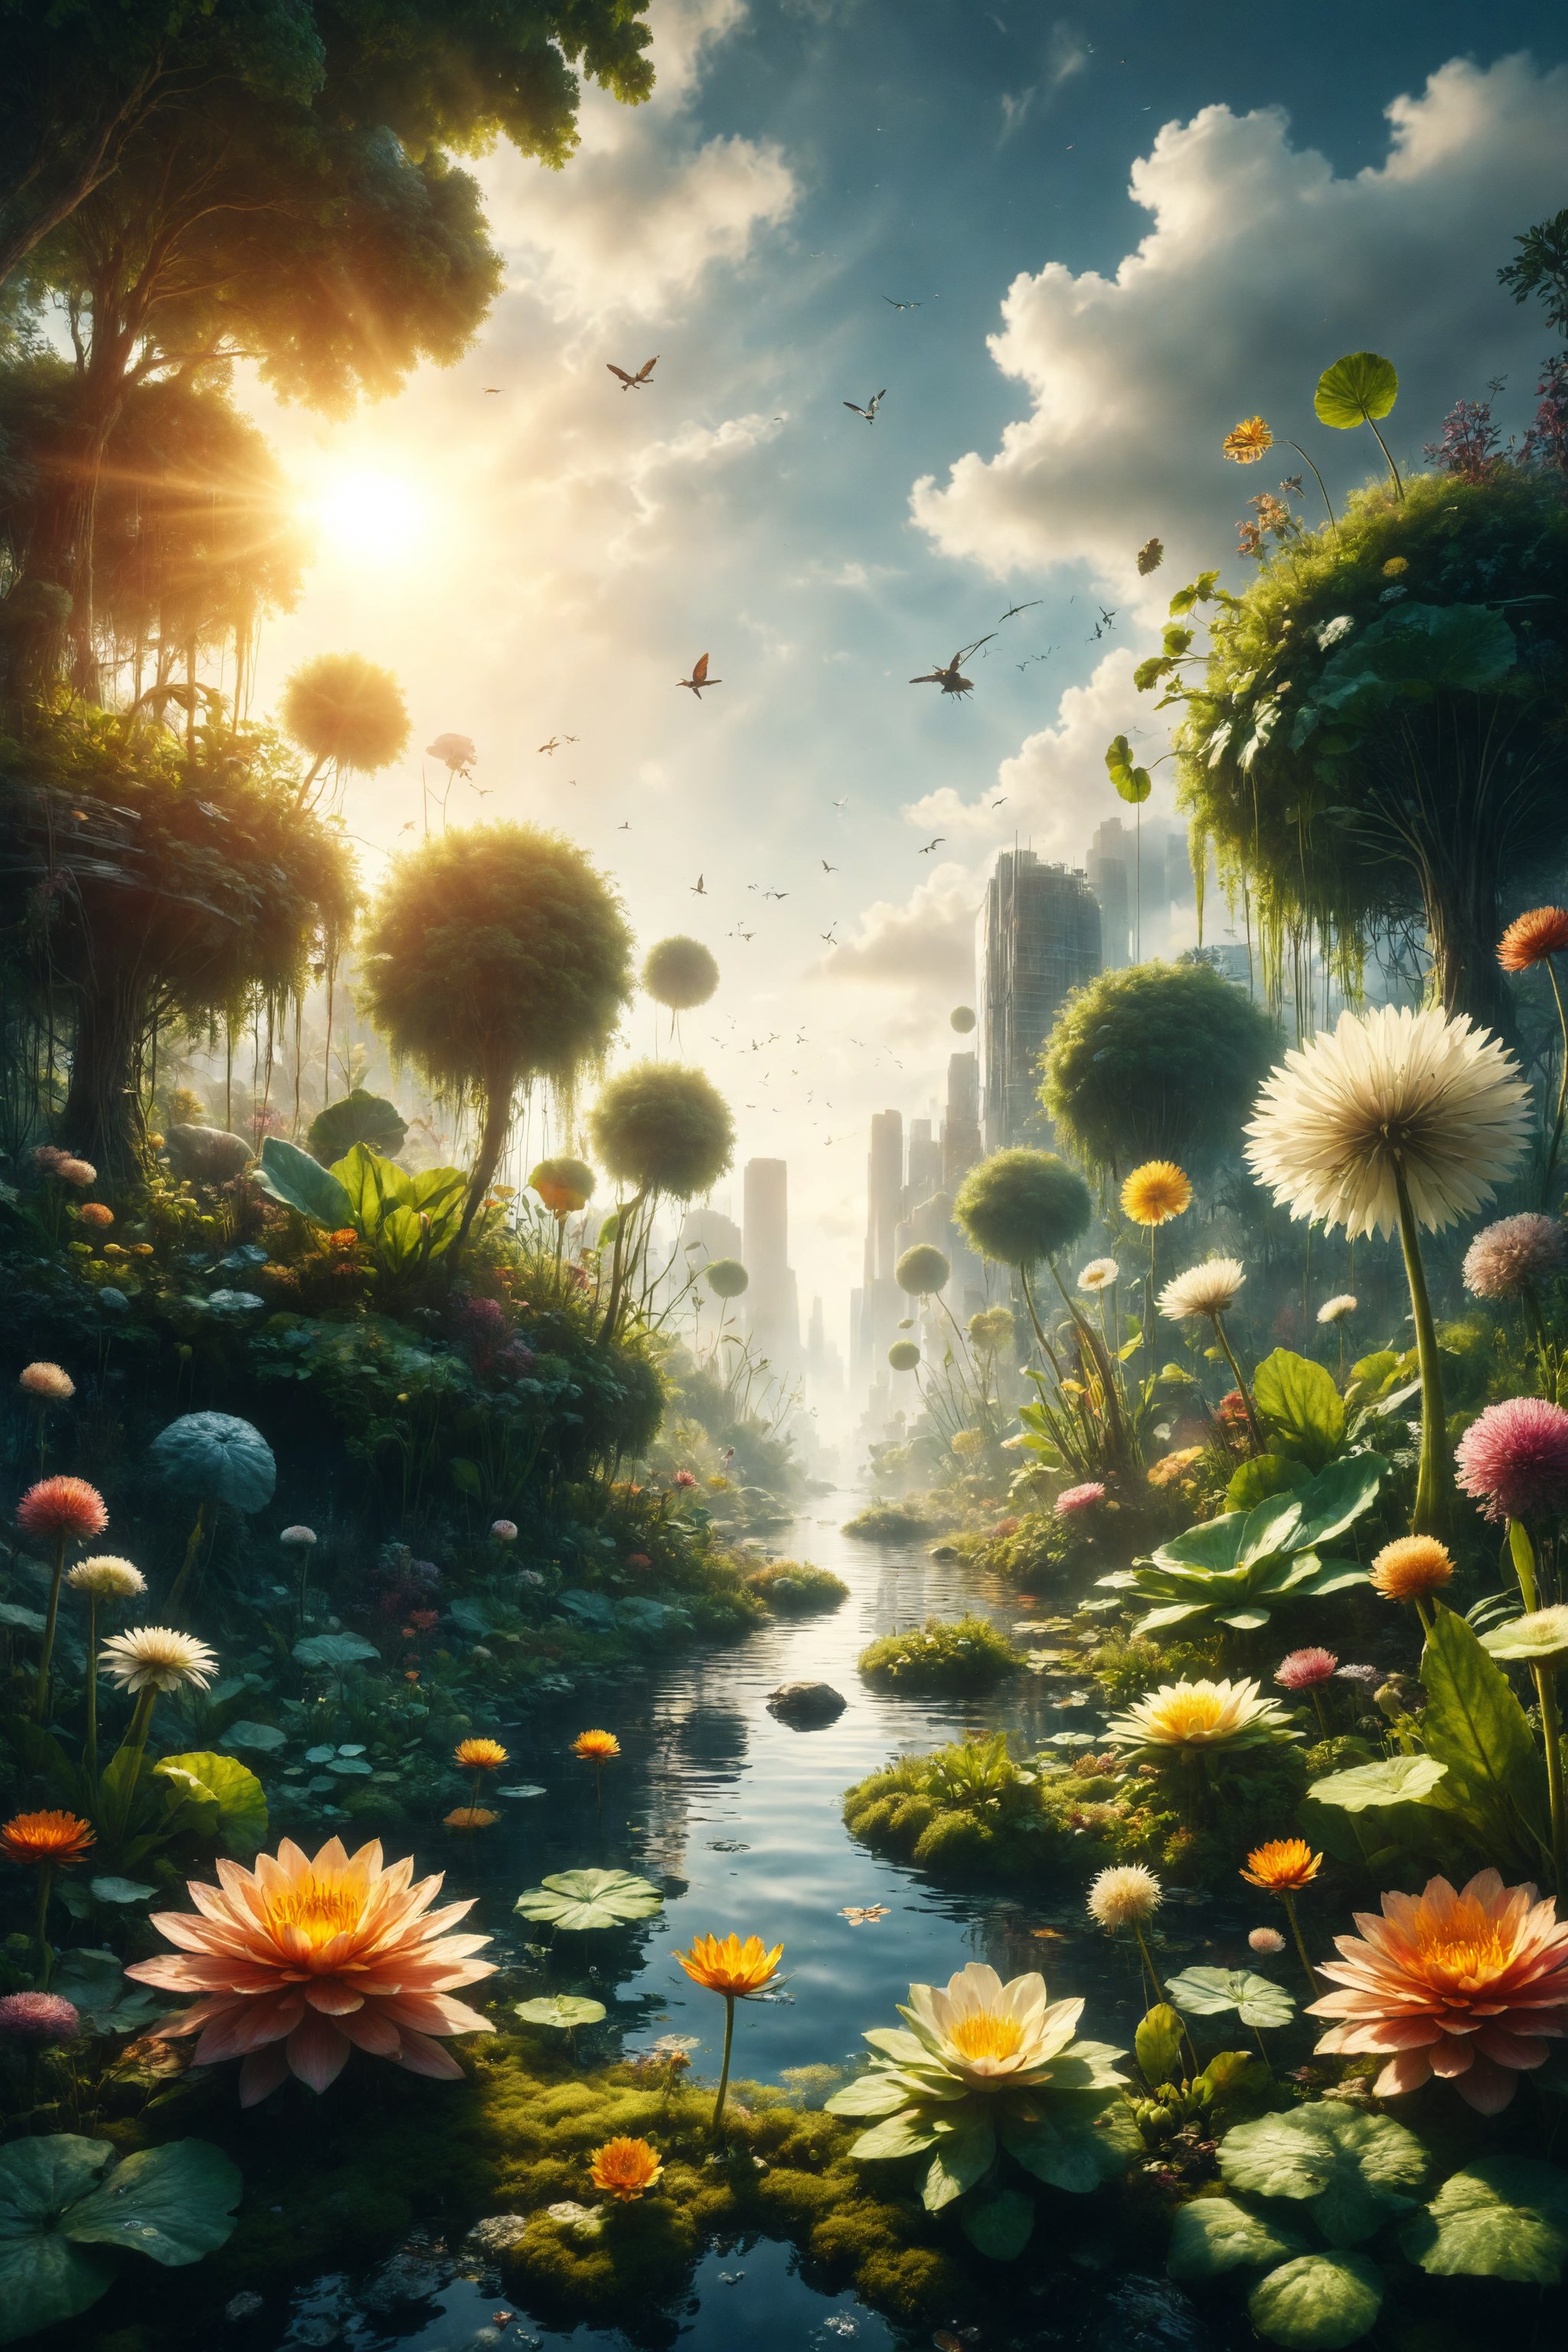 Create an illustration of a floating botanical garden near the sun, with plants adapted to the intense sunlight.